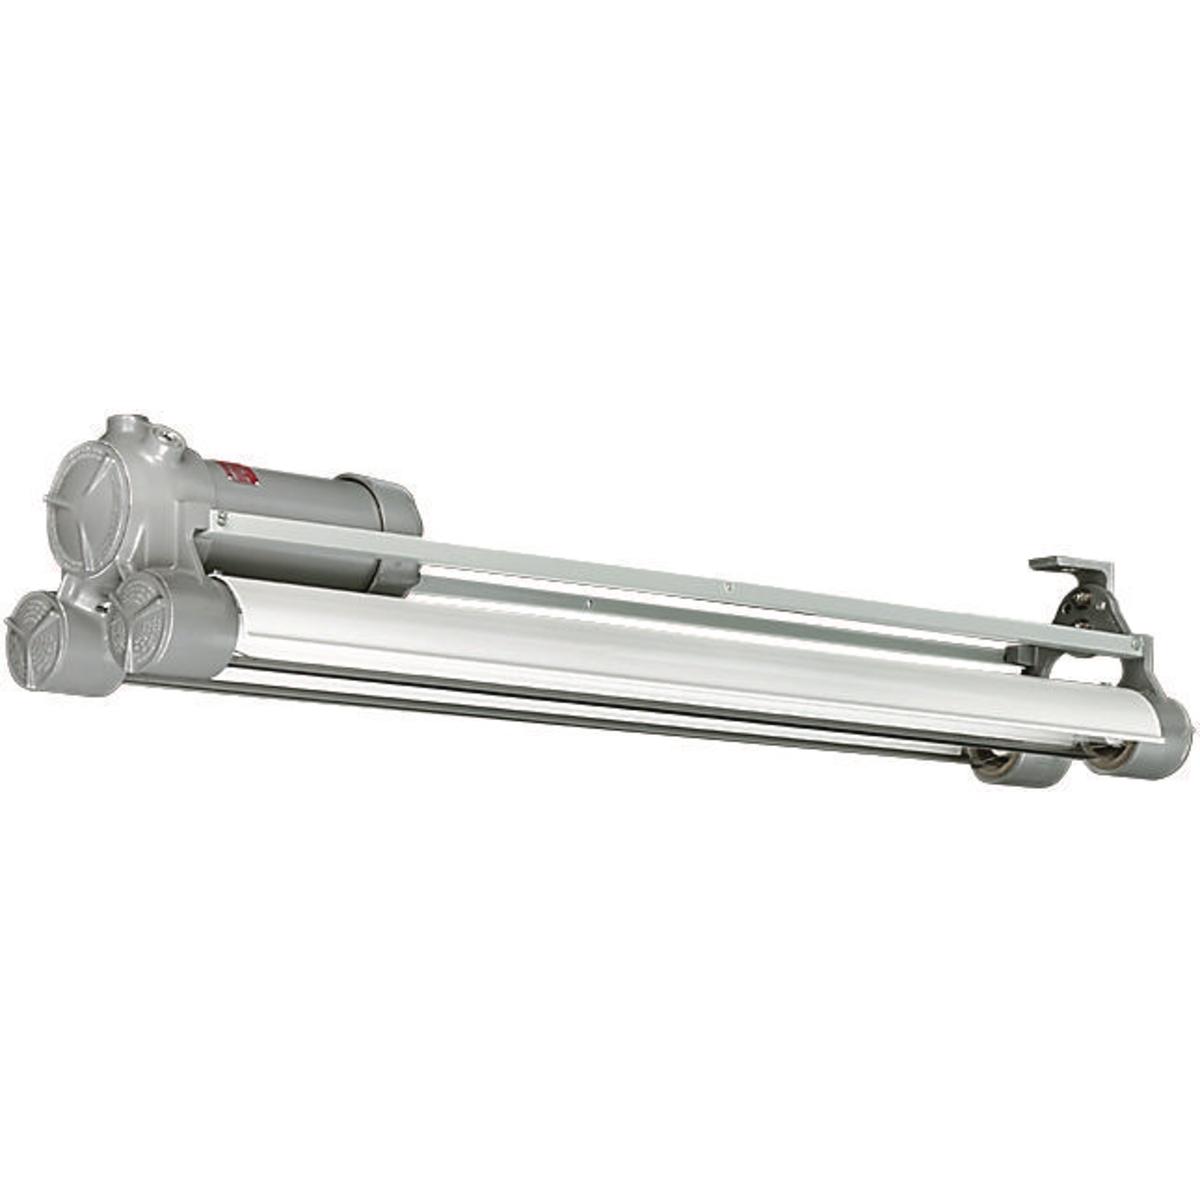 Hubbell HFX-430-82-WL HFX 40W 220/240V 2 Lamo with Lamps  ; UL Listed and labeled for use inside paint spray booths and rooms ; 2’ nominal compact models facilitate use in areas too small for nominal 4’ models, or where the light must be confined ; Standard ballast is 120-277V